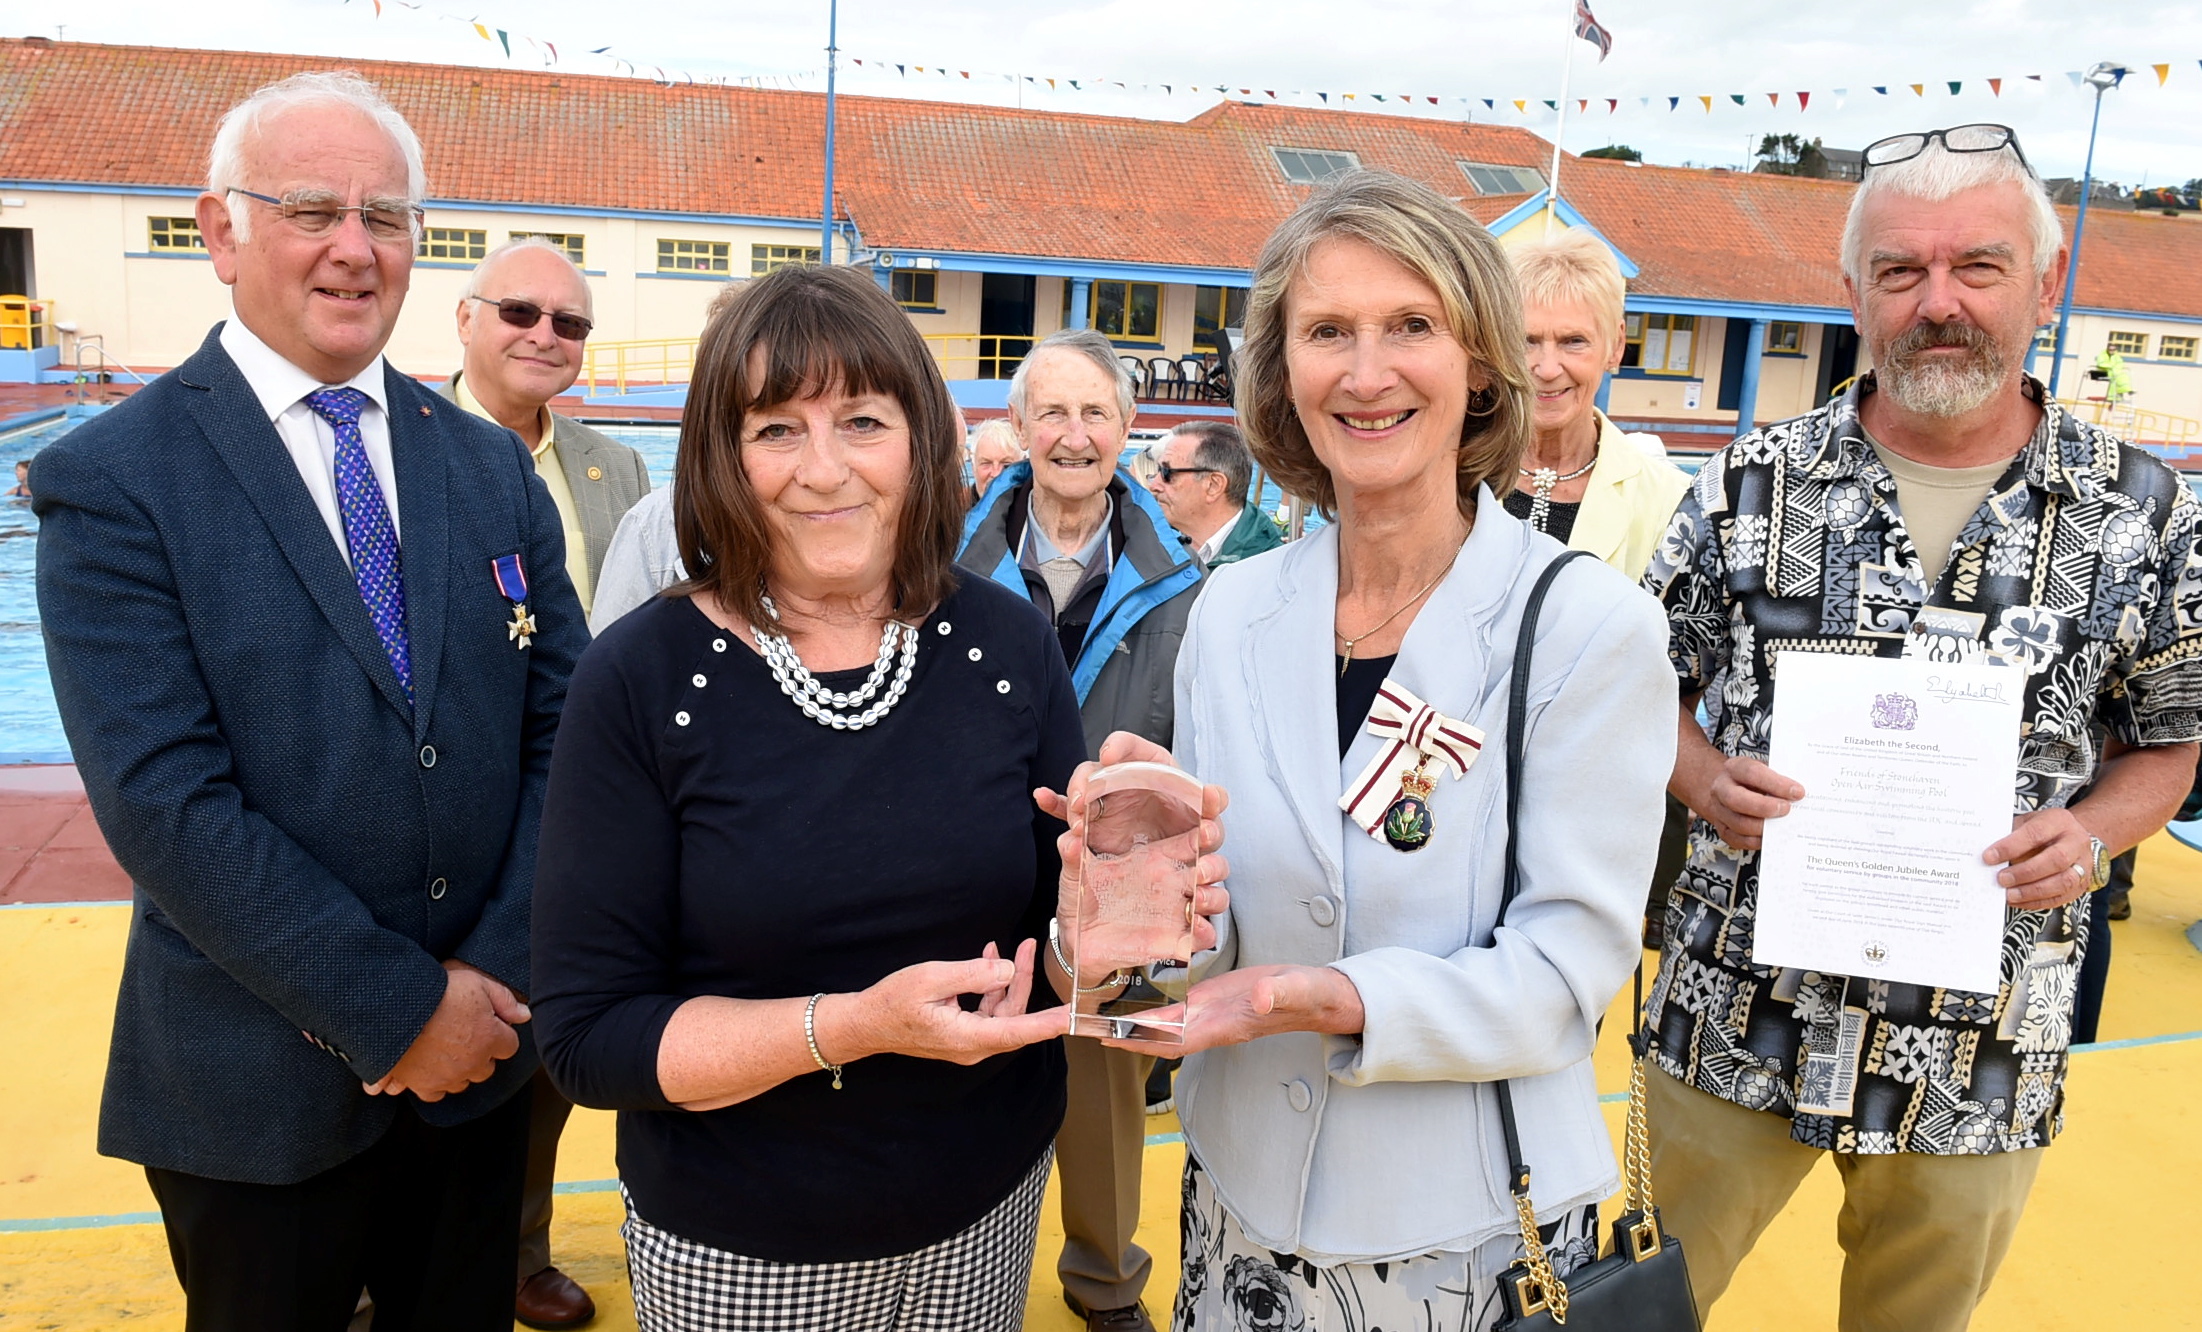 The lord lieutenant of Kincardinshire, Carol Kinghorn, handed over the Queen's award for voluntary service to the Friends of Stonehaven open air swimming pool. In the picture are from left: Gordon Ritchie, Kate Bain, Carol Kinghorn, lord lieutenant of Kincardineshire and Pete Hill, chairman. 
Picture by Jim Irvine